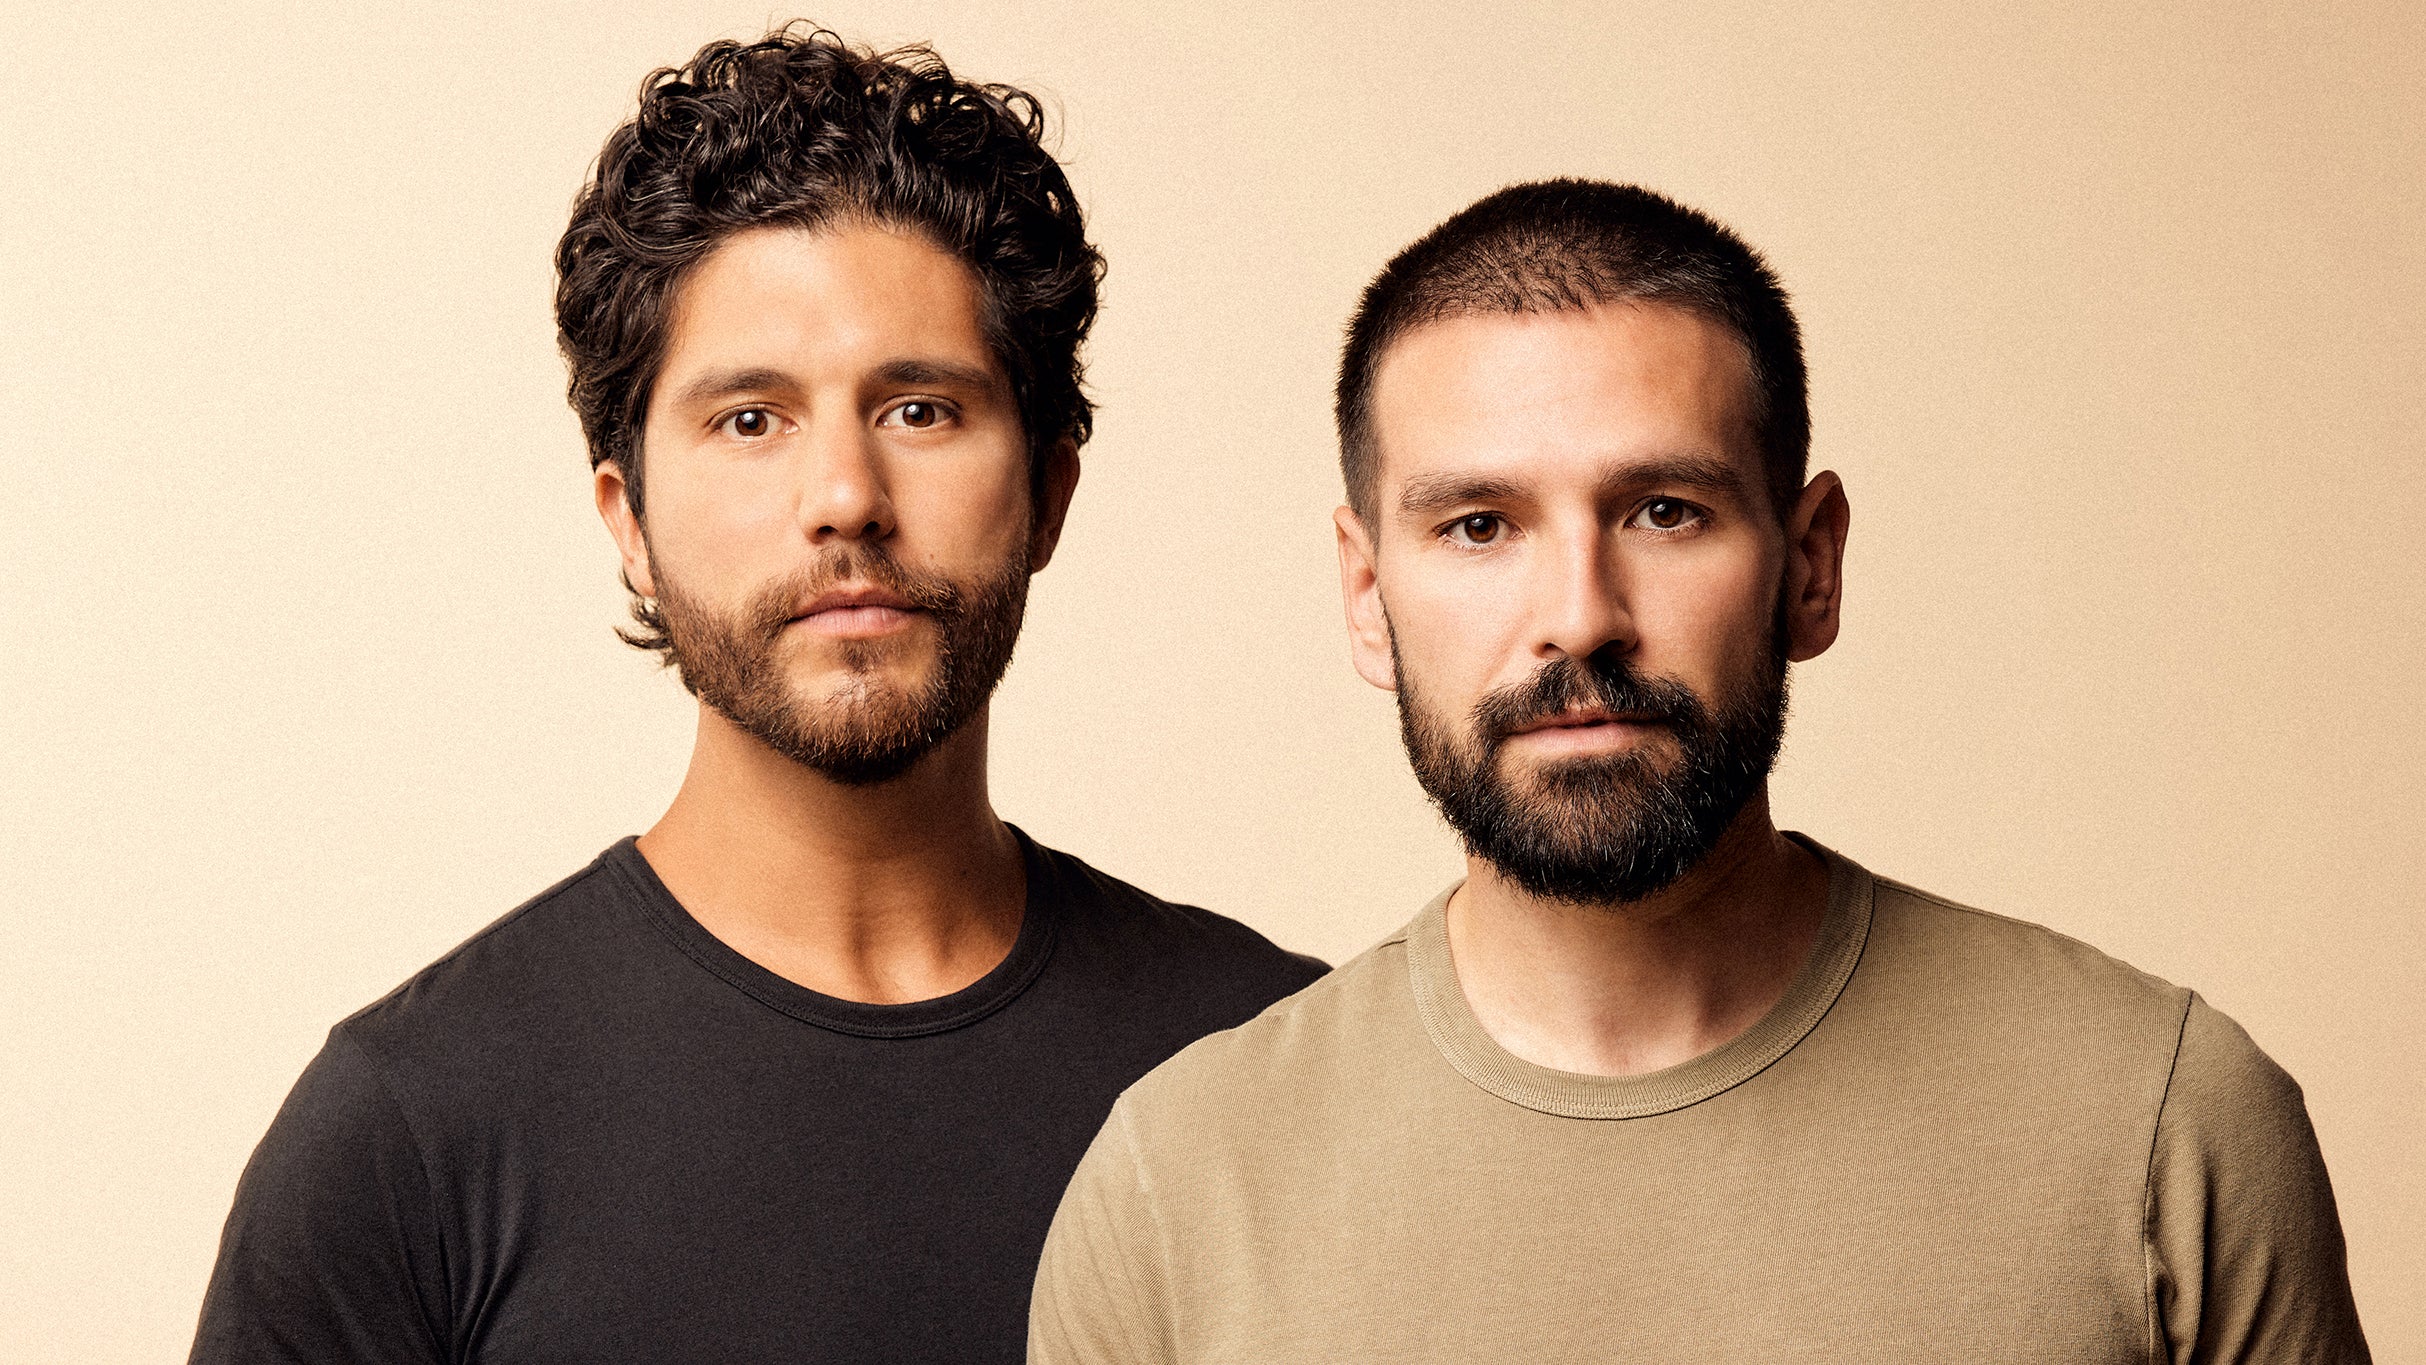 Dan + Shay: Heartbreak On The Map Tour free presale info for performance tickets in Gilford, NH (BankNH Pavilion)